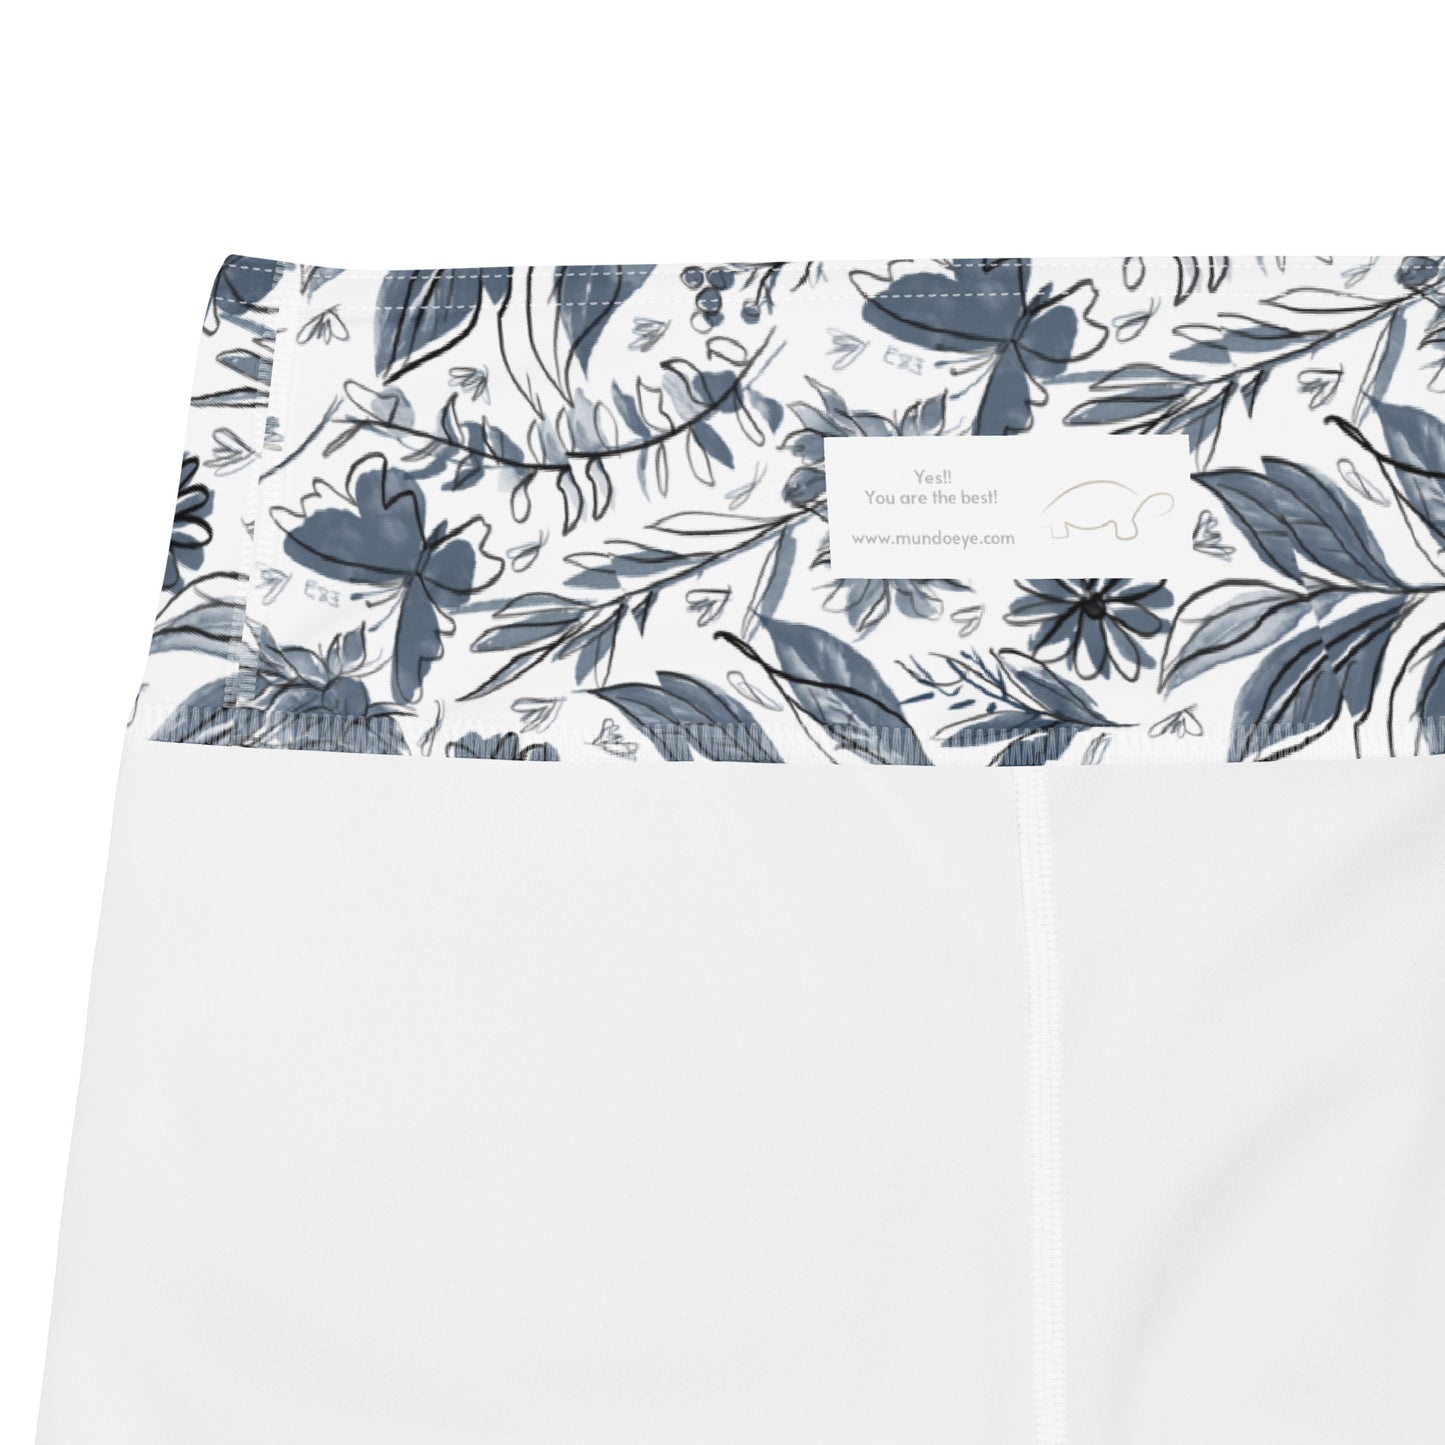 Watercolor White Yoga Shorts. Houston Collection. Design hand-painted by the Designer Maria Alejandra Echenique